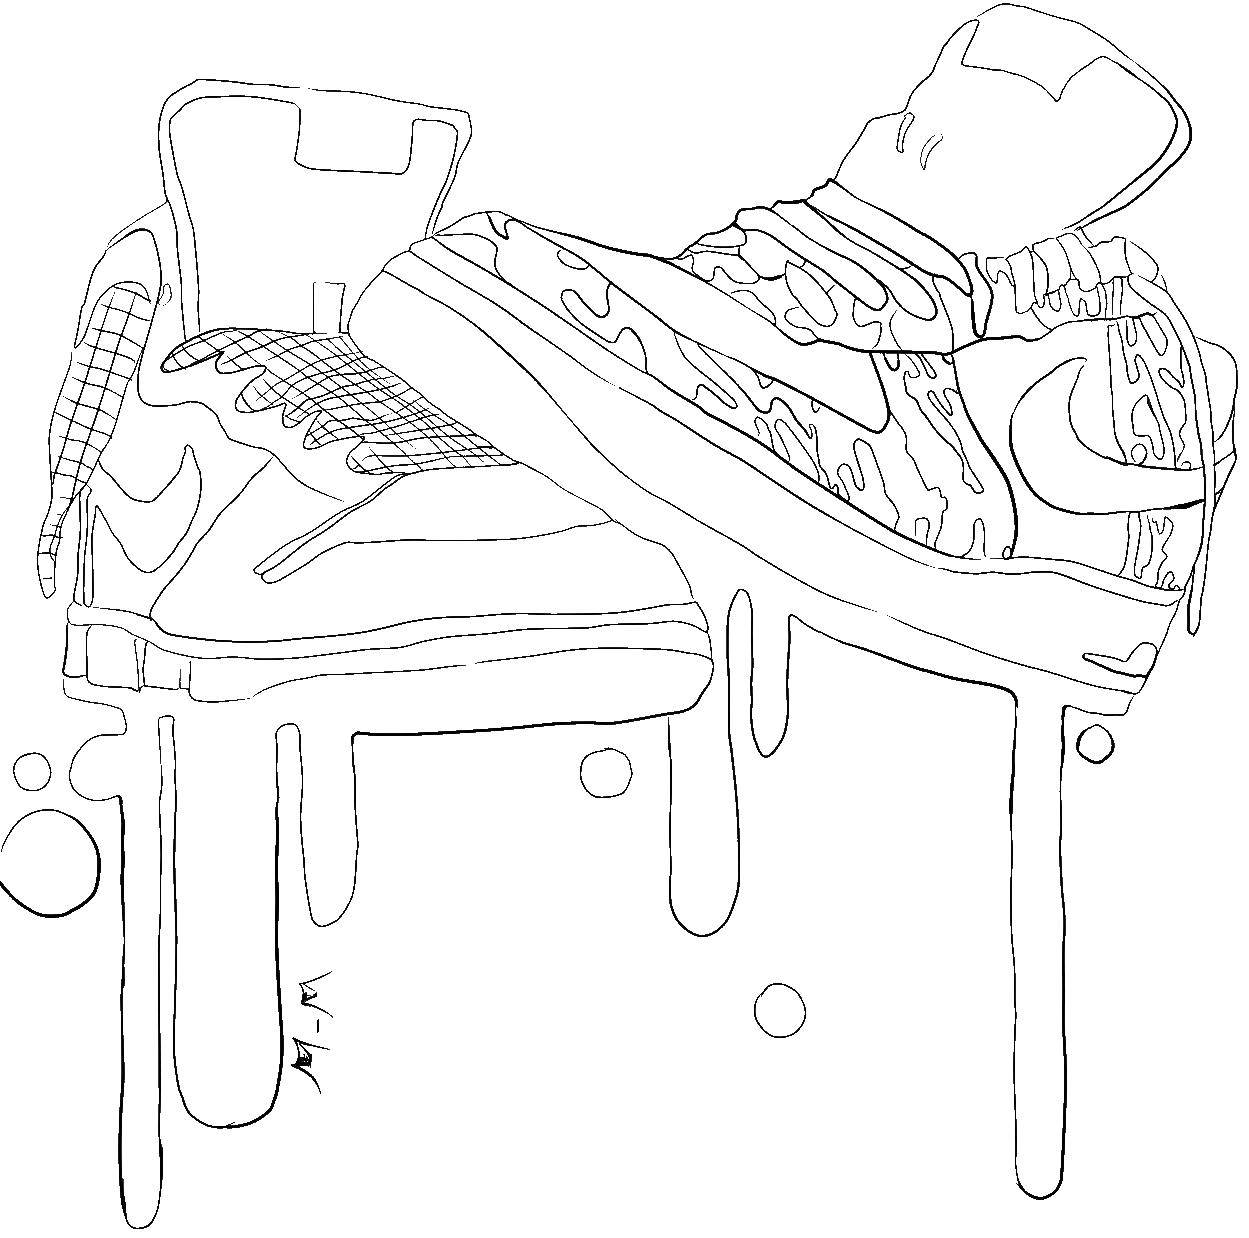 Coloring Fashion sneakers. Category shoes. Tags:  Shoes, sneakers, laces.